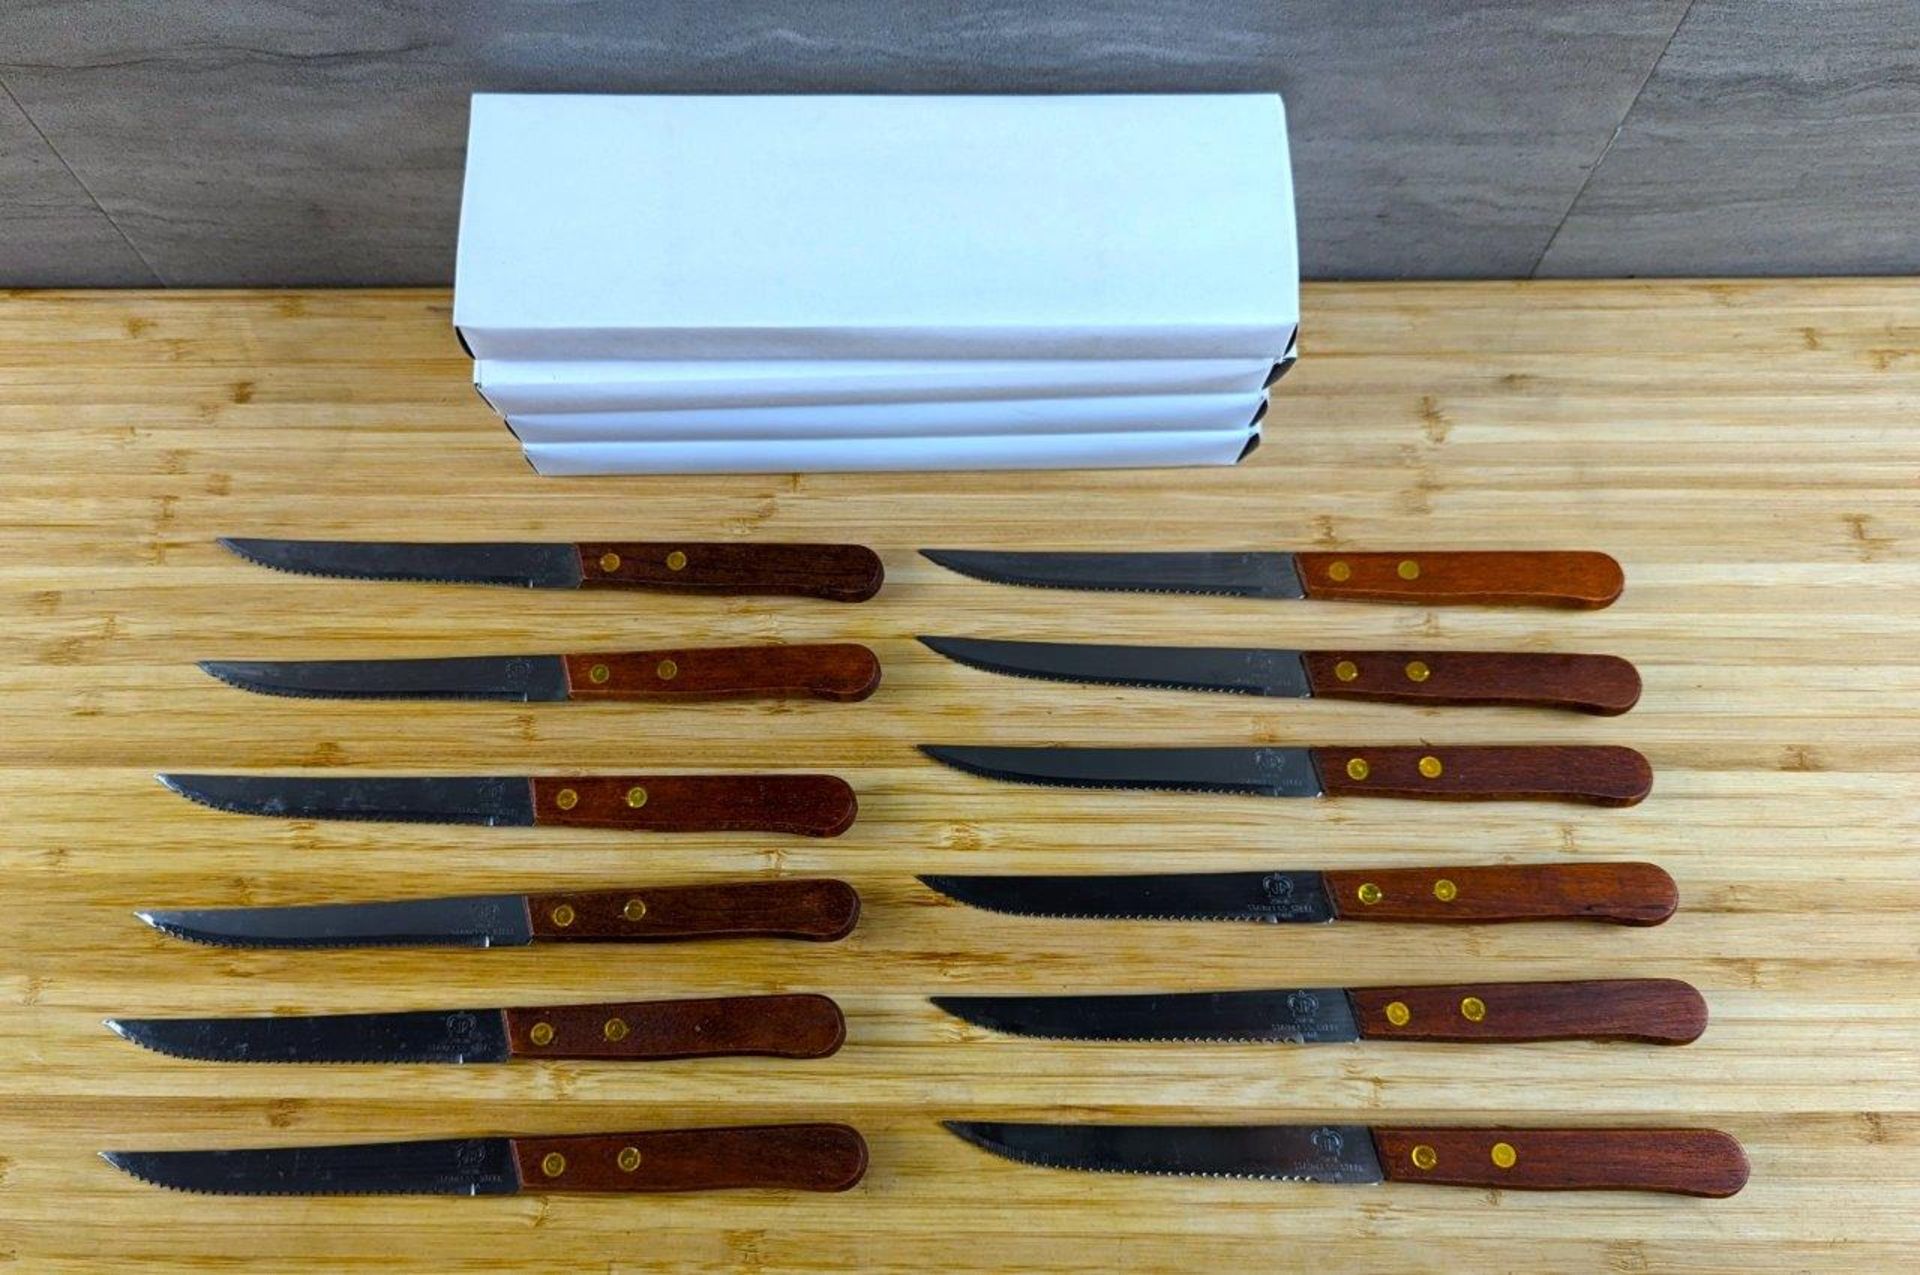 STEAK KNIVES WITH WOOD HANDLE - LOT OF 4DZS